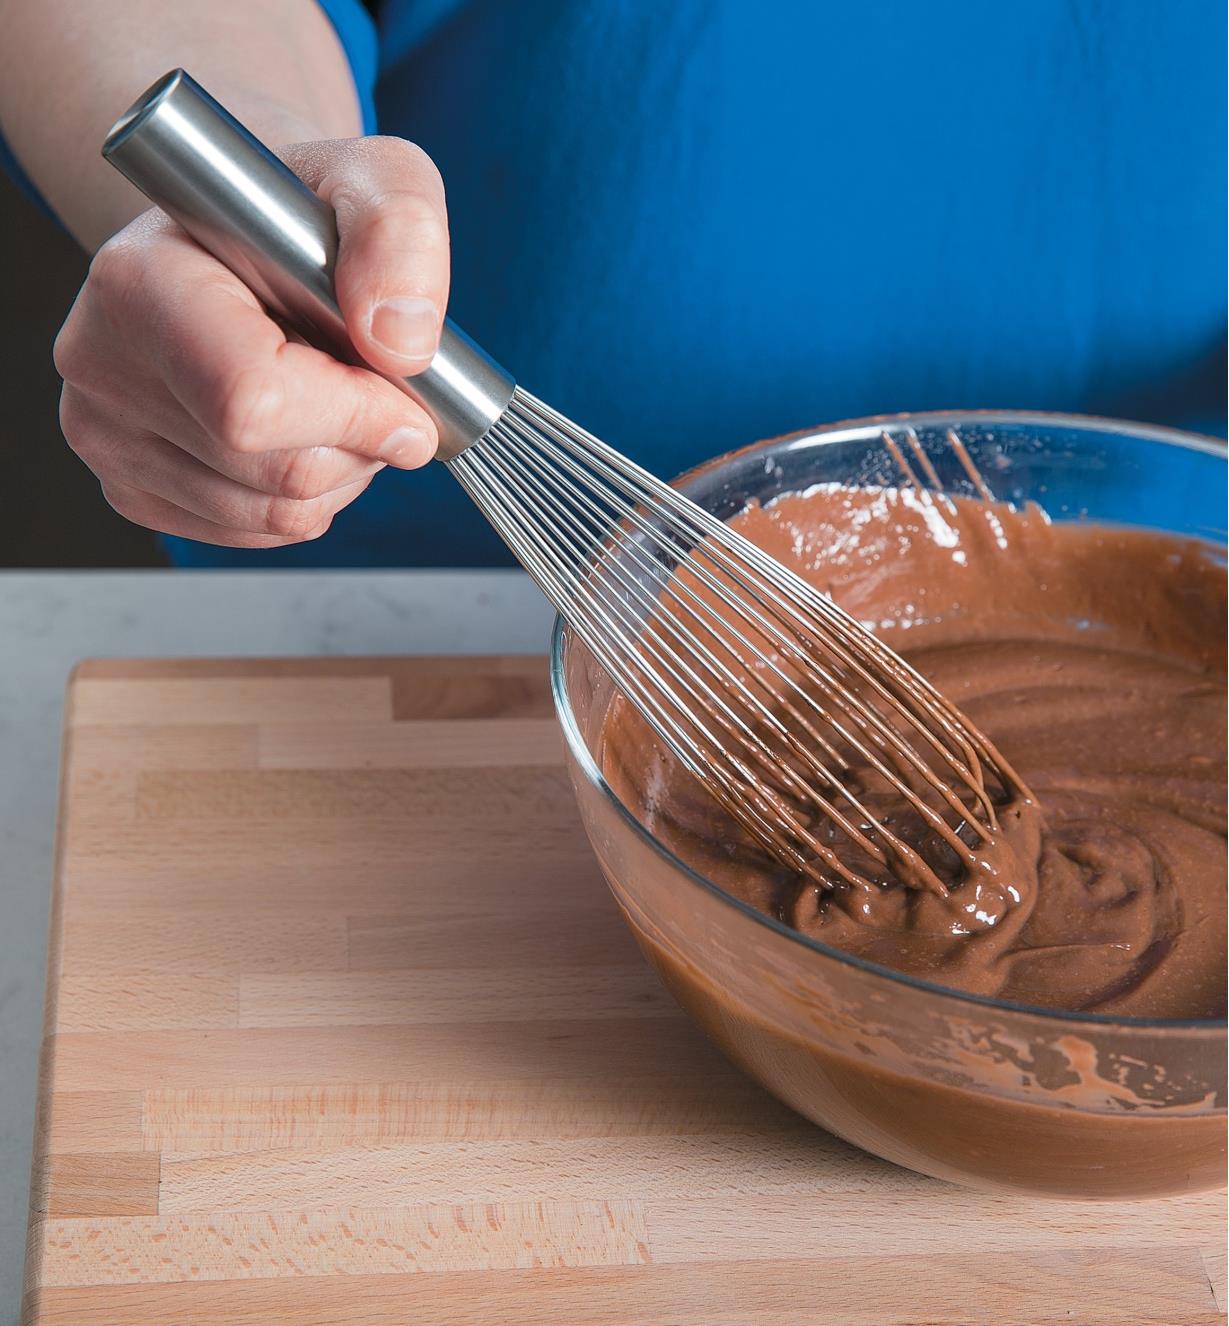 Using a 10 1/4" French whisk to mix batter